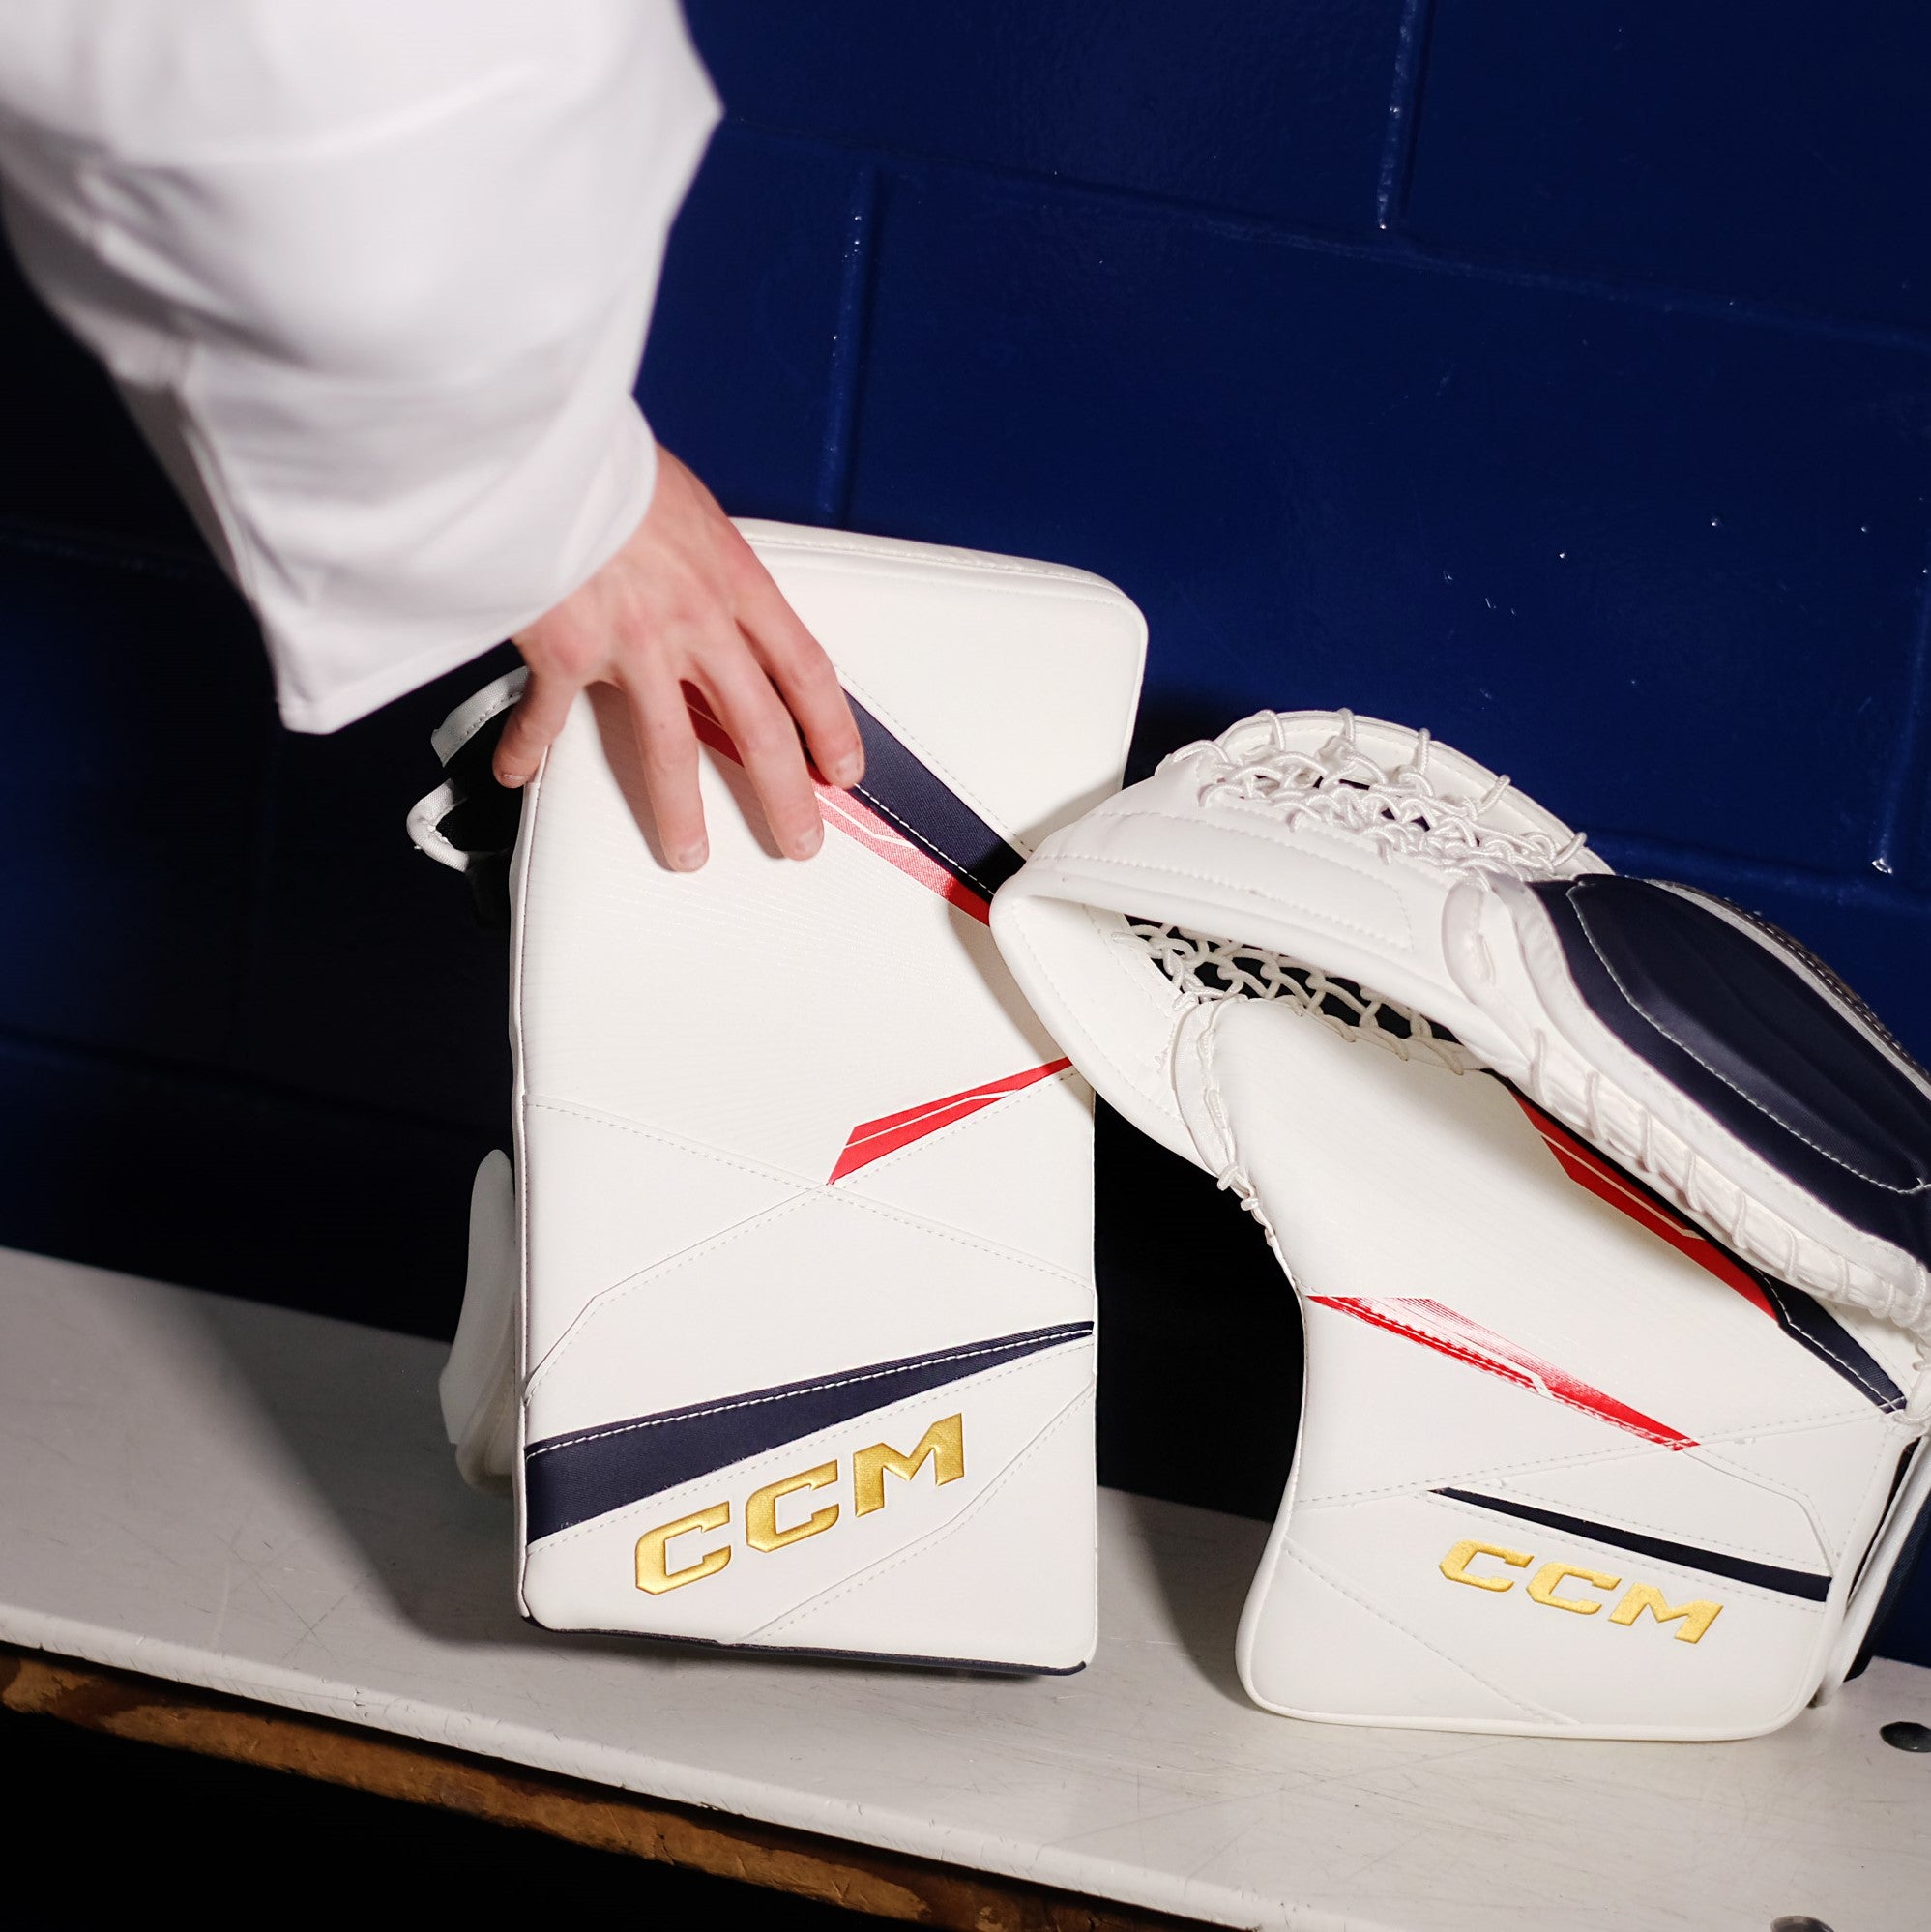 CCM Axis 2 Gear Review at The Hockey Shop 